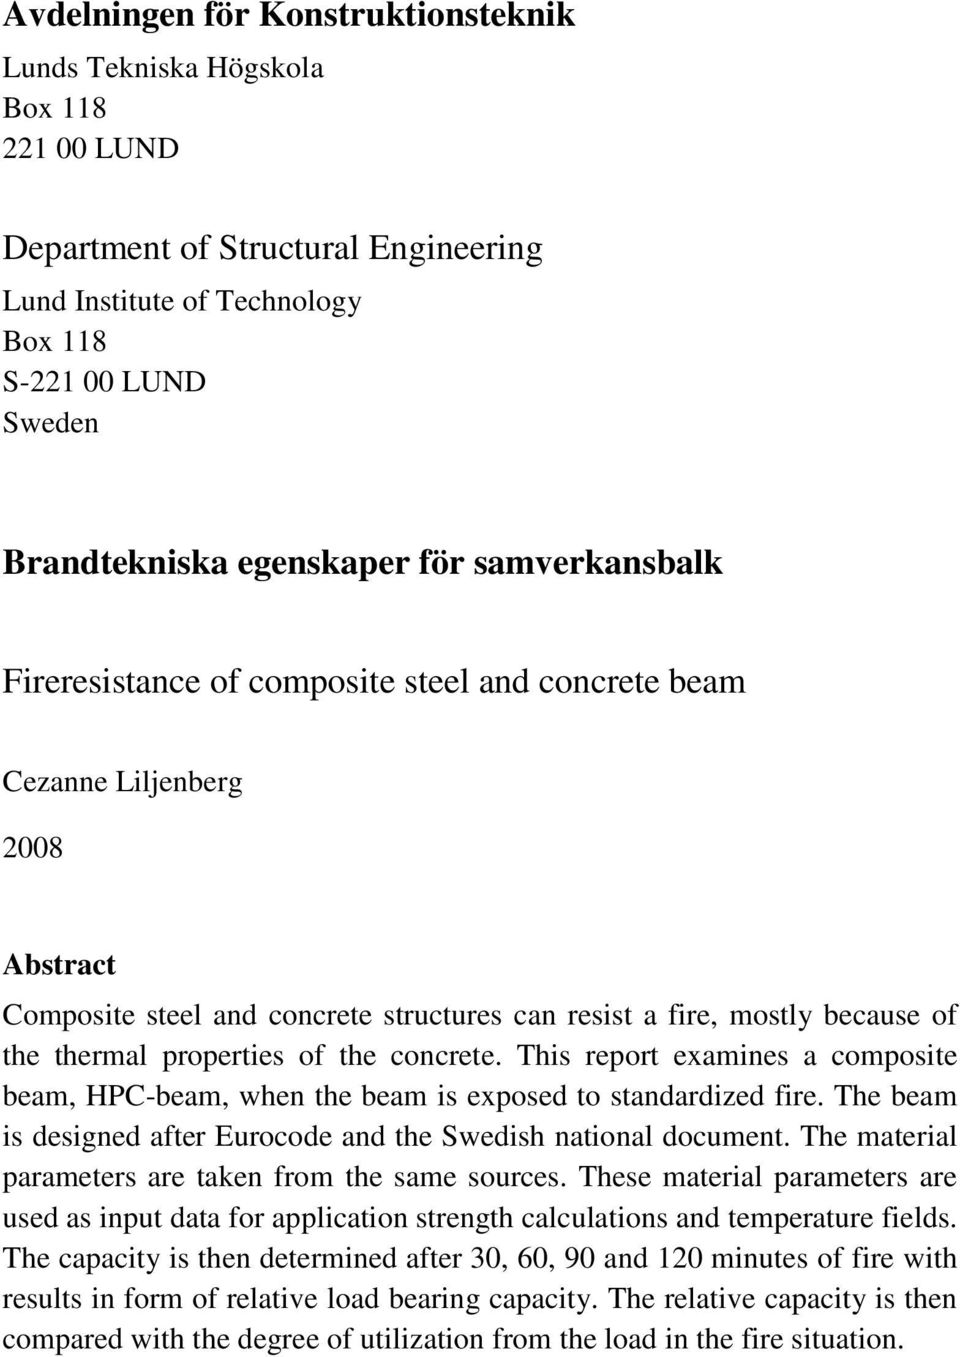 properties of the concrete. This report examines a composite beam, HPC-beam, when the beam is exposed to standardized fire. The beam is designed after Eurocode and the Swedish national document.